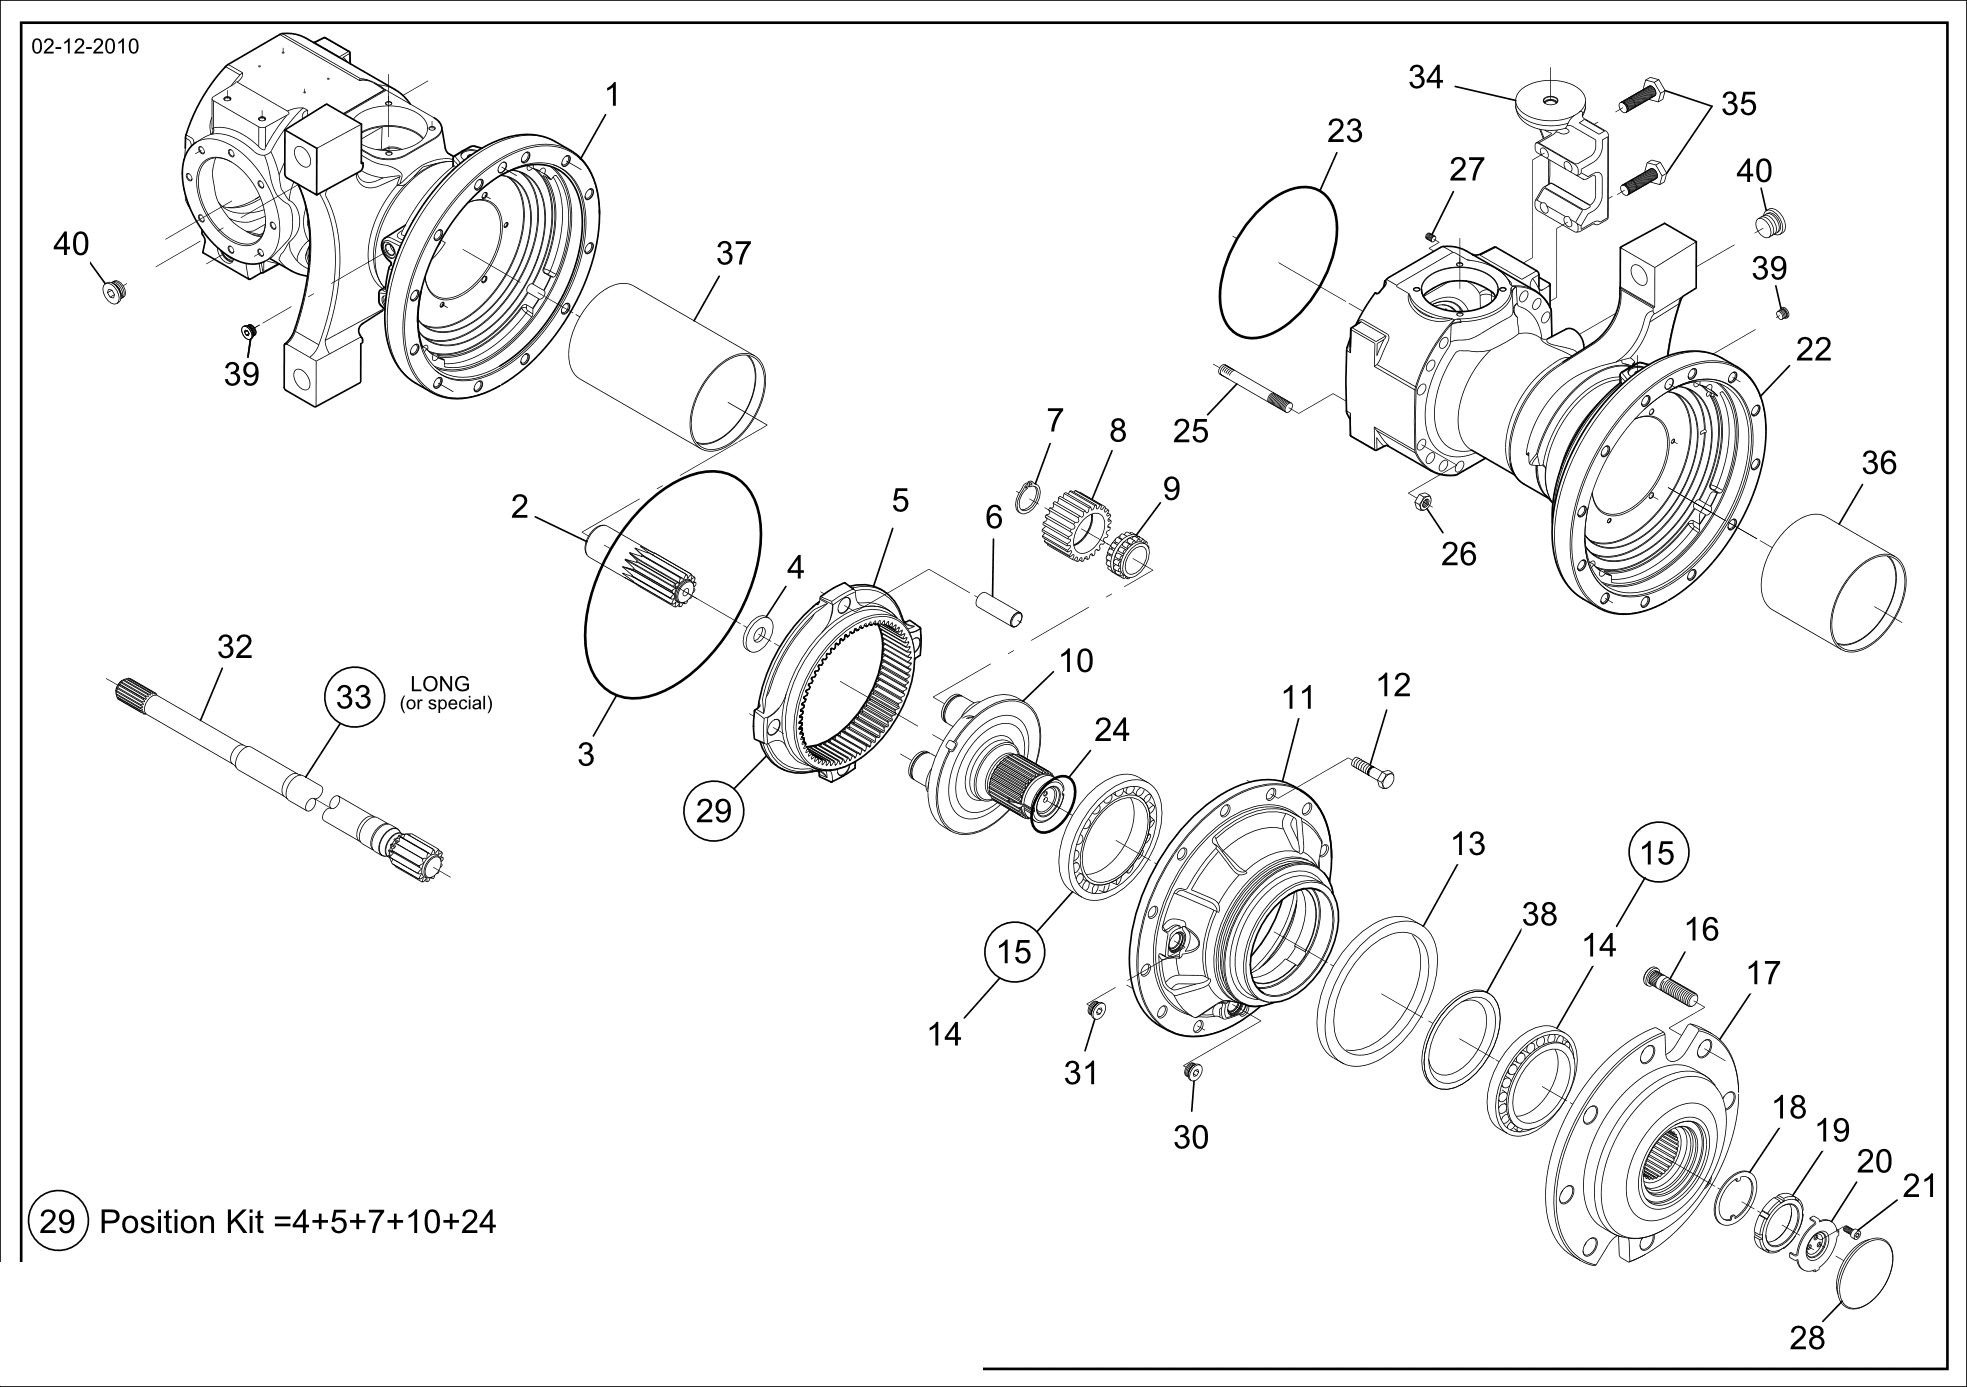 drawing for CNH NEW HOLLAND 153310811 - PLUG (figure 5)